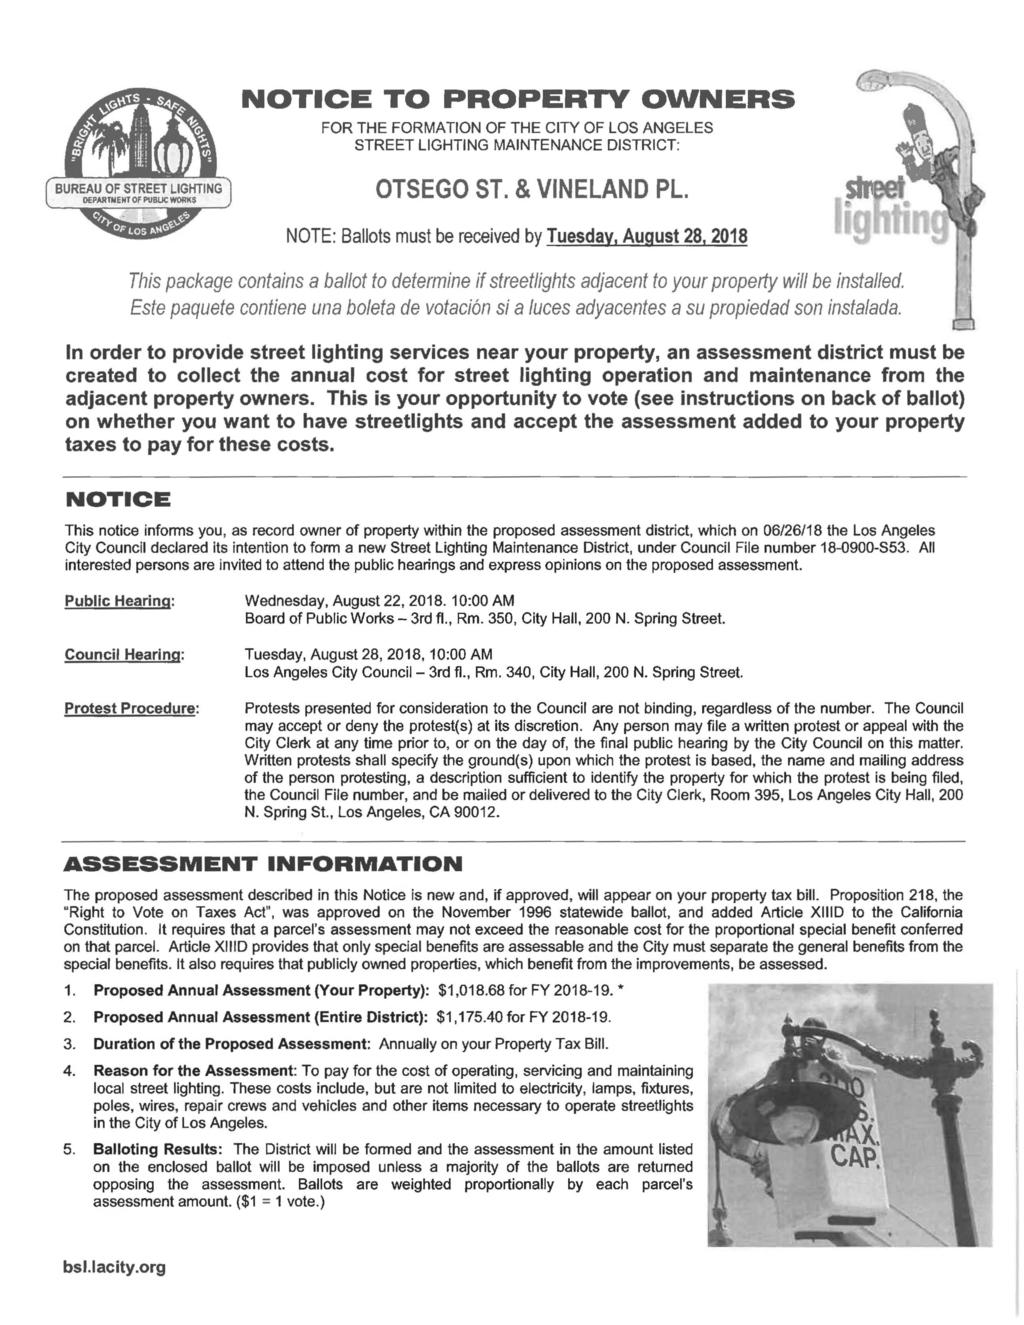 BUREAU OF STREET LIGHTING OEPARIHENT OF PUBUC WORKS NOTICE TO PROPERTY OWNERS FOR THE FORMATION OF THE CITY OF LOS ANGELES STREET LIGHTING MAINTENANCE DISTRICT: OTSEGO ST. & VINELAND PL.